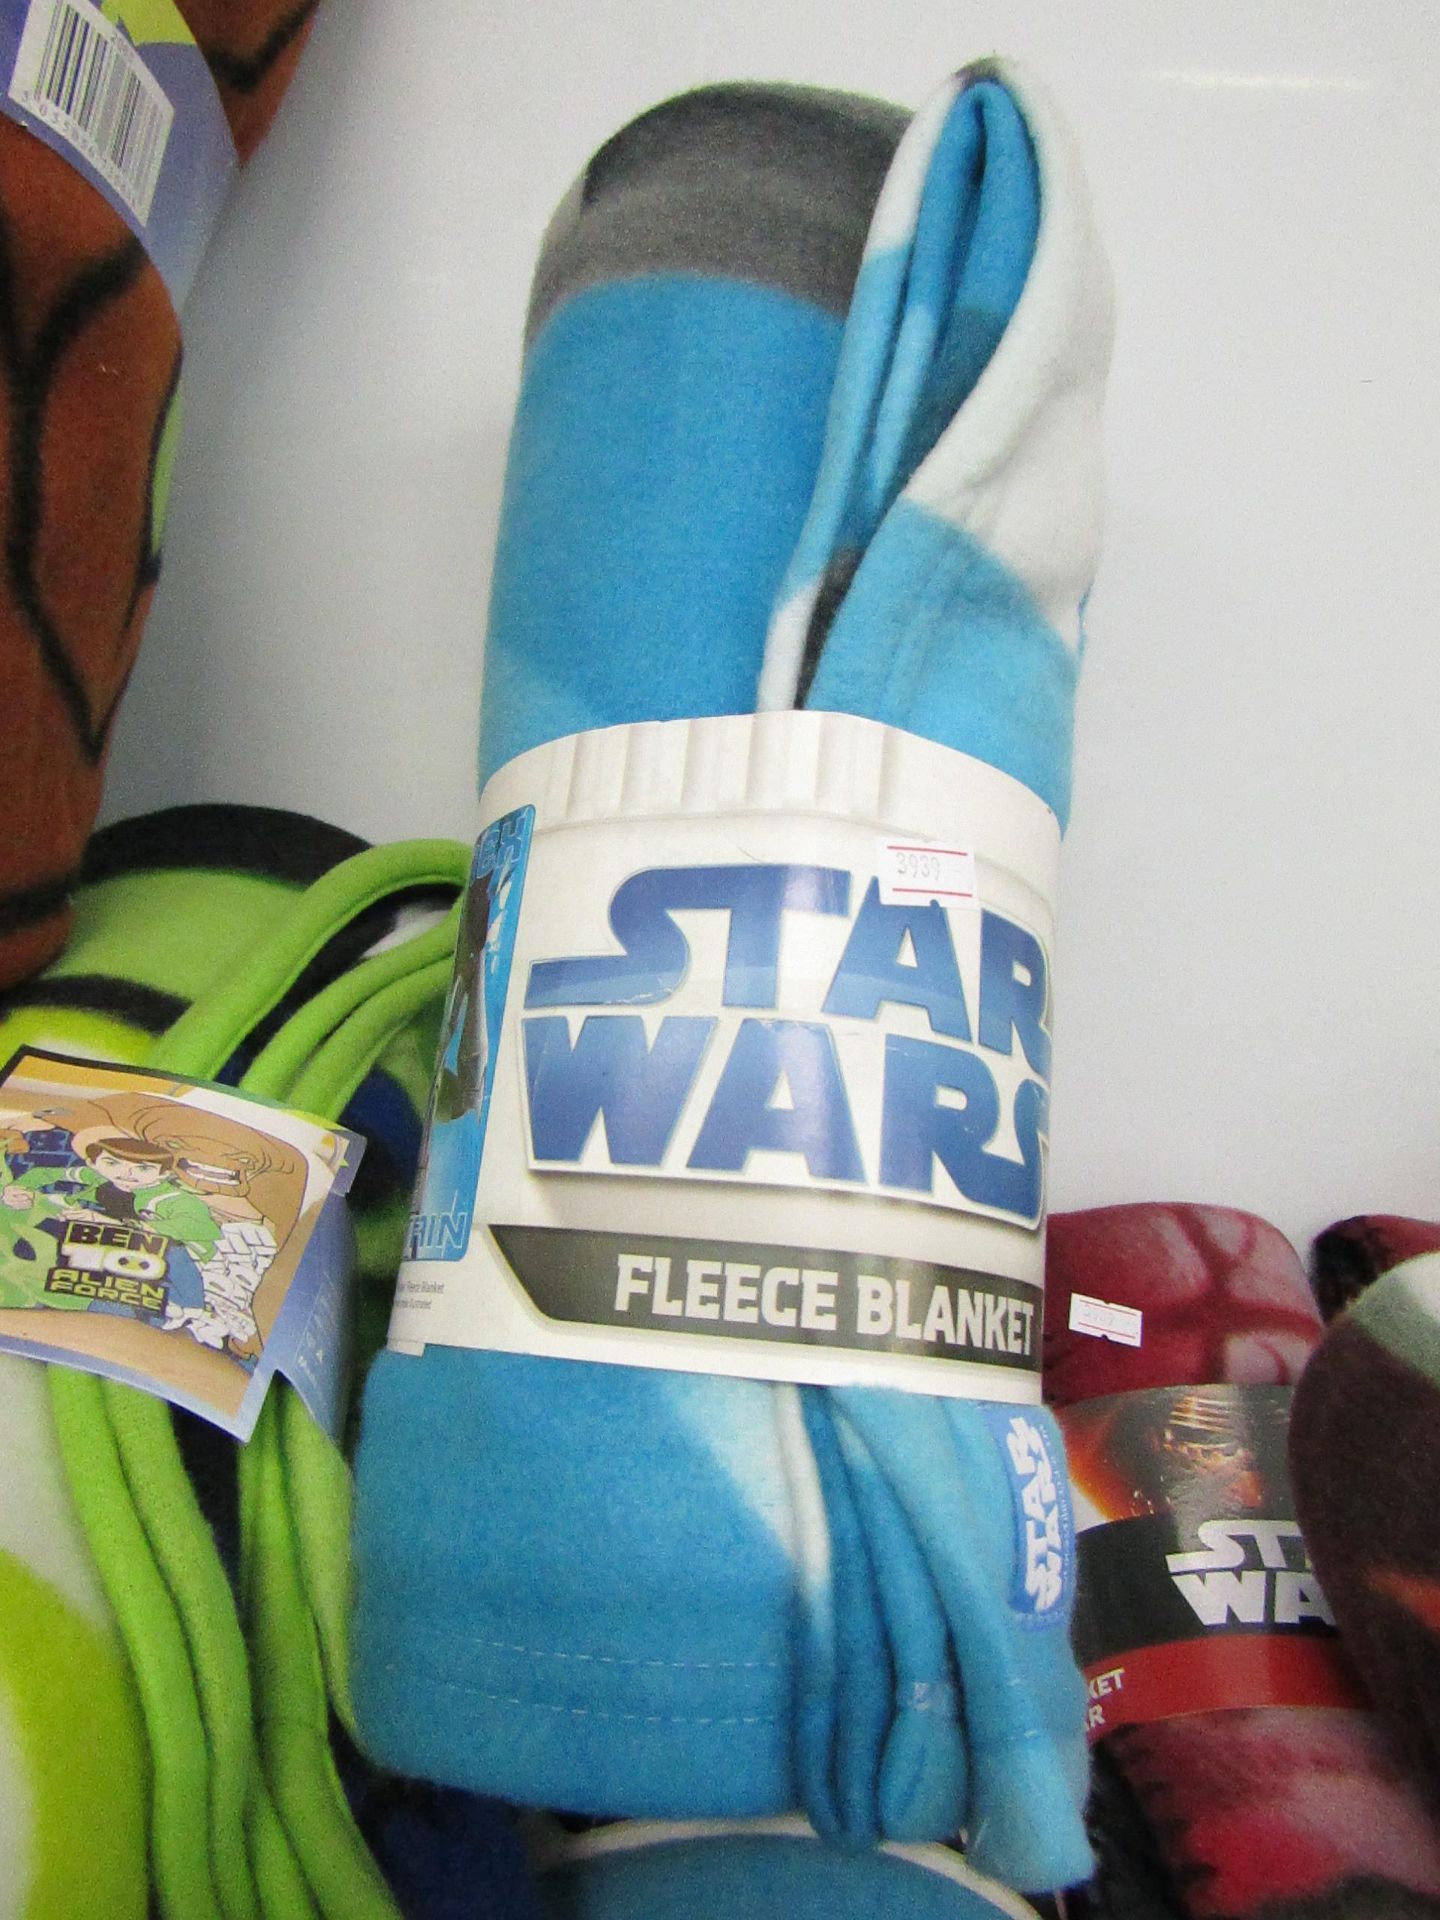 Star Wars Fleece Blanket. New with Tags.